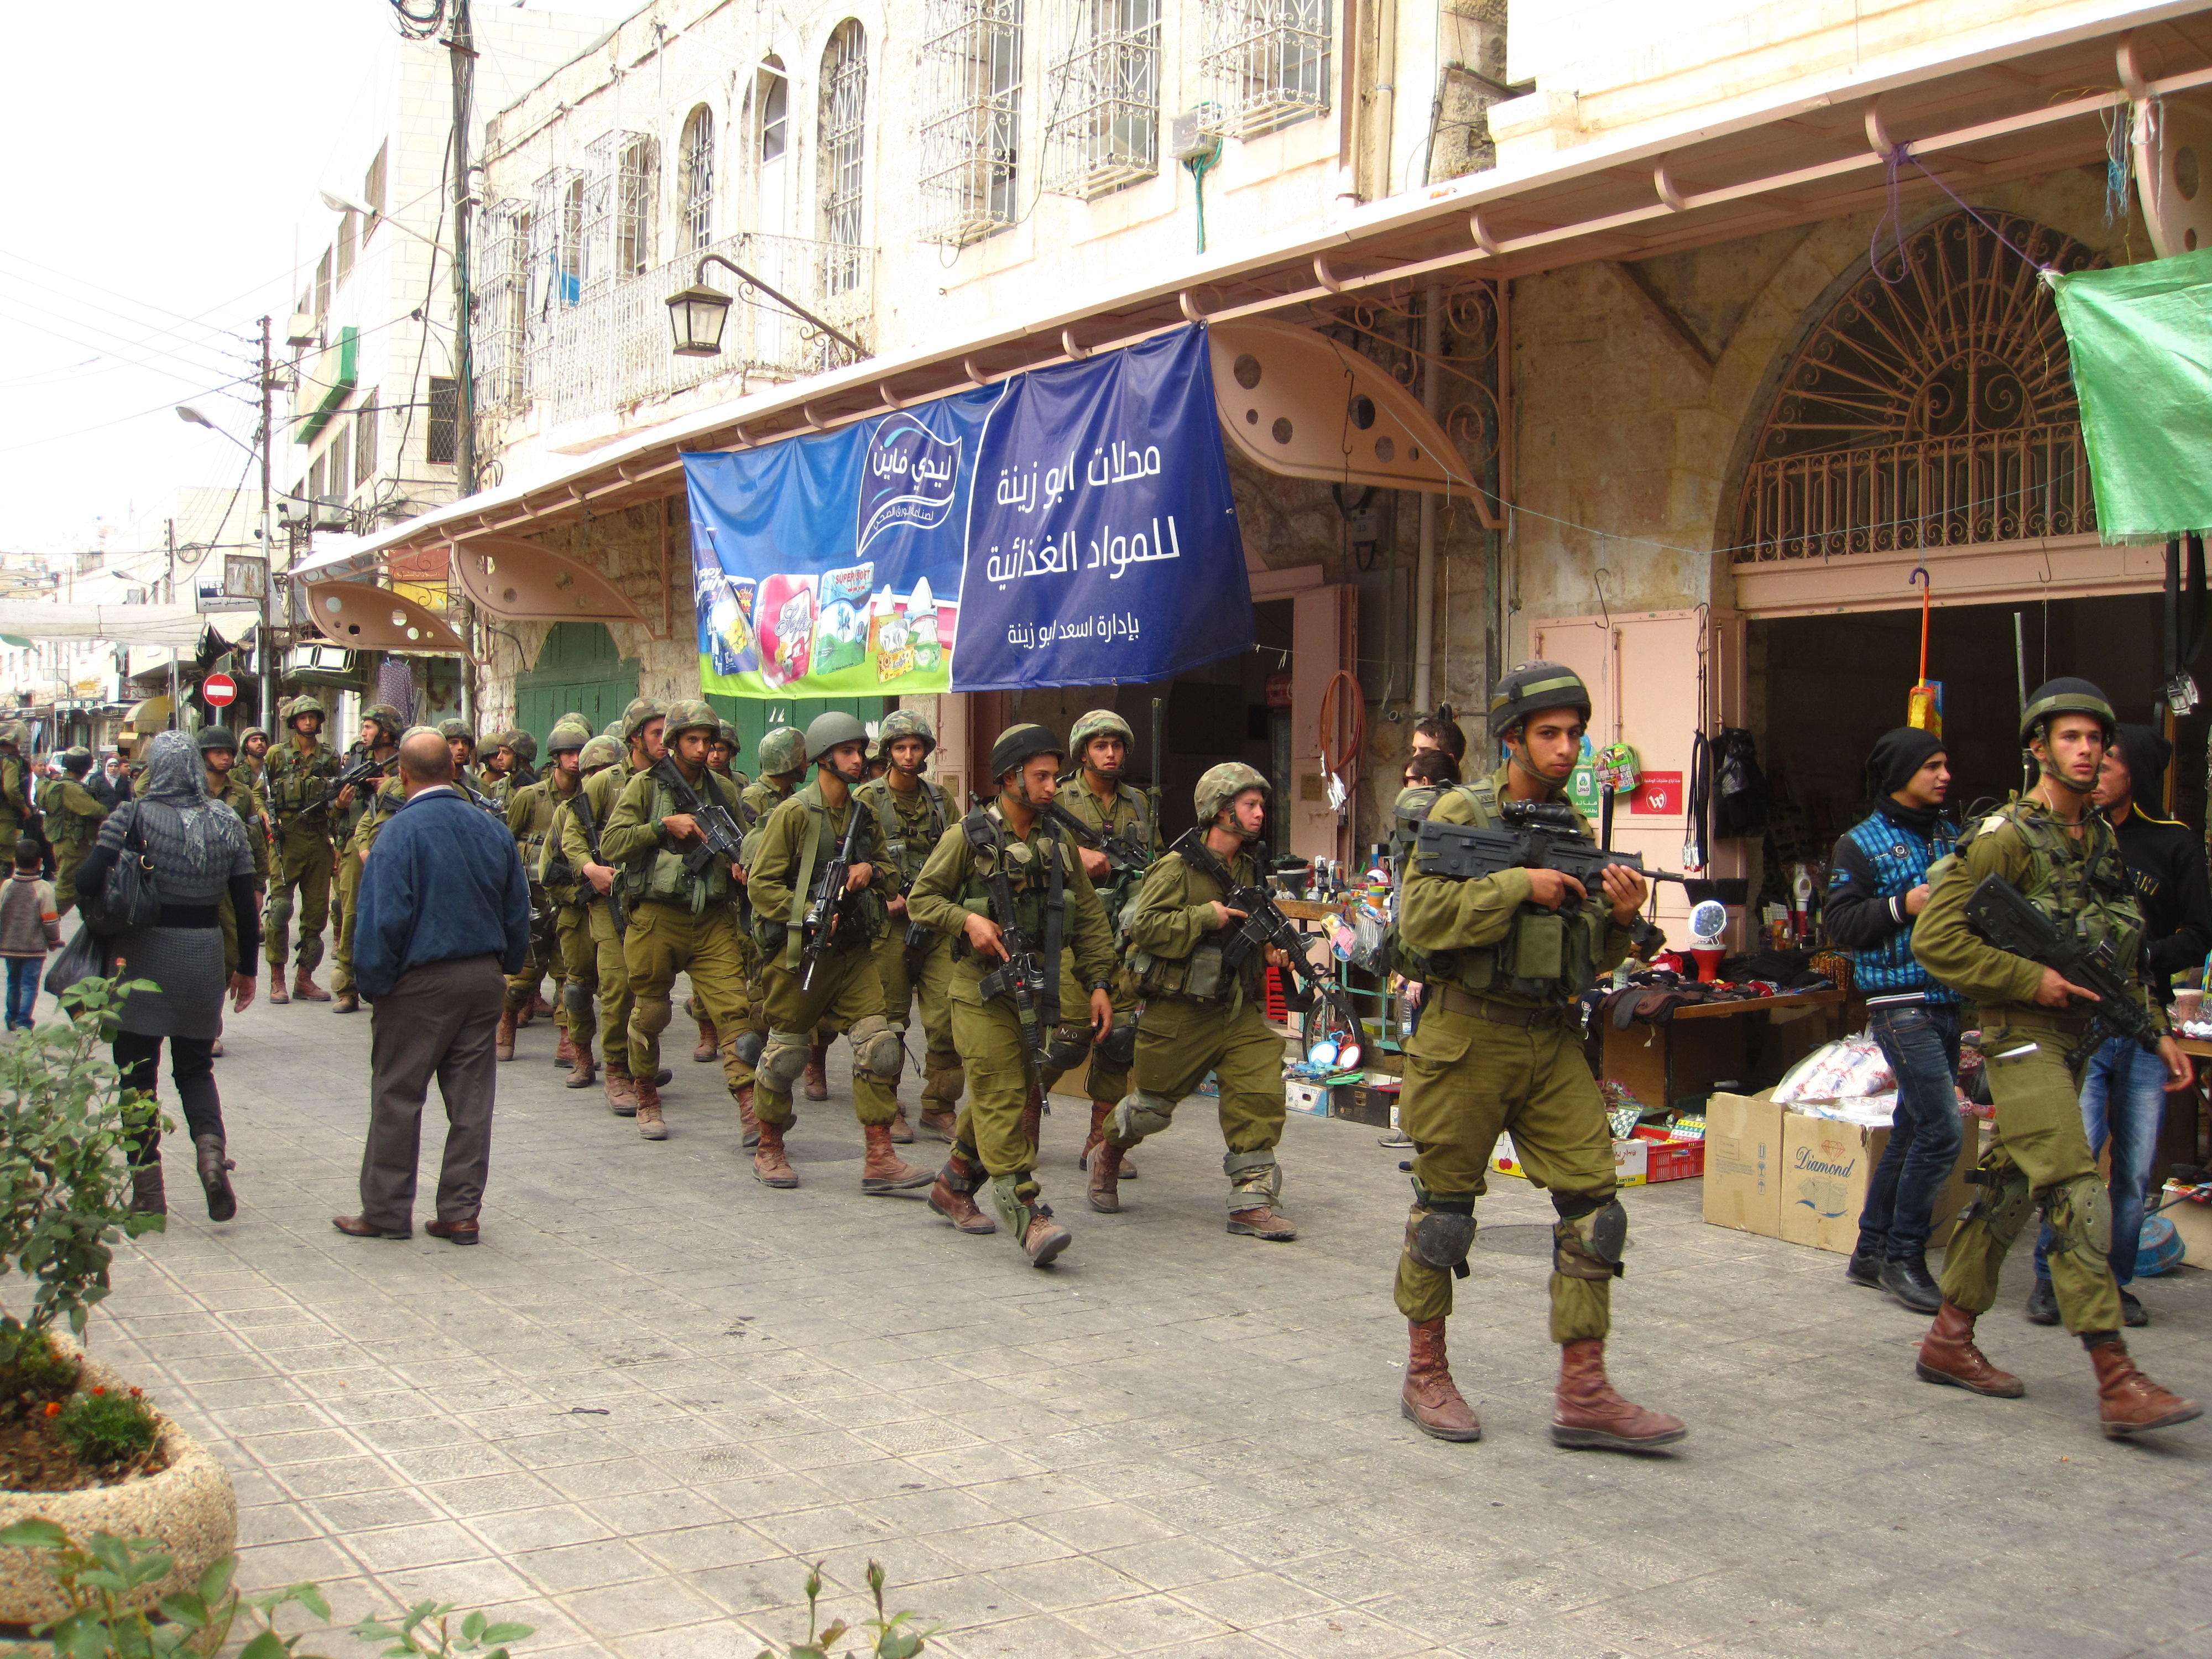 Soldiers clear old city streets in preparation for settler tours. Photo cred: Brona McDonald.